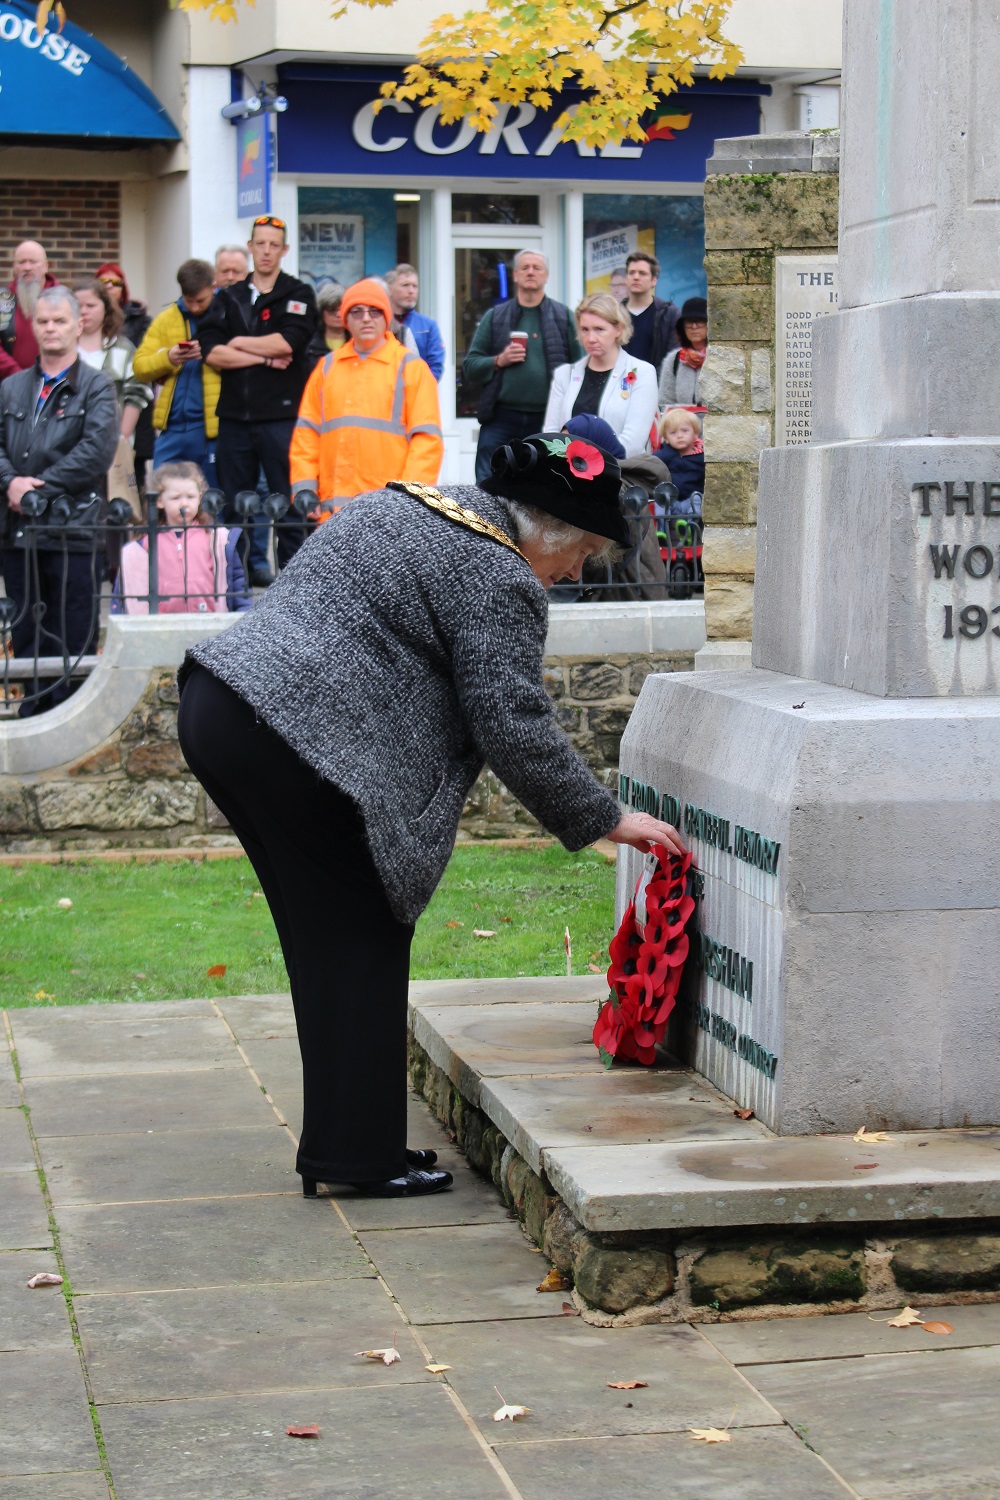 HDC Chairman Cllr Kate Rowbottom leads wreath laying on behalf of the people of Horsham District